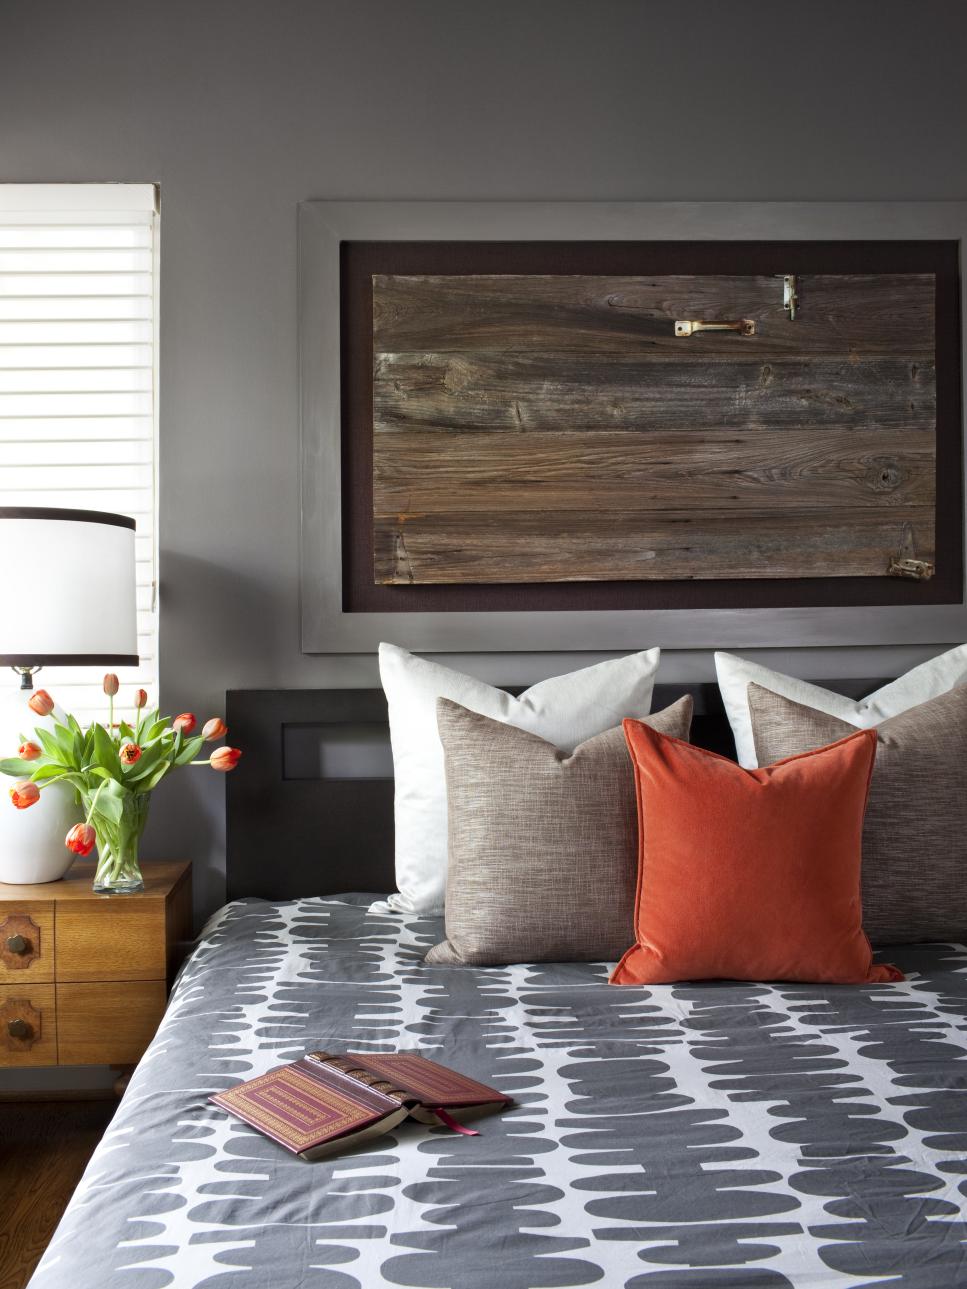 Bedroom With Patterned Gray Bedding, Wood Wall Art and Orange Accents